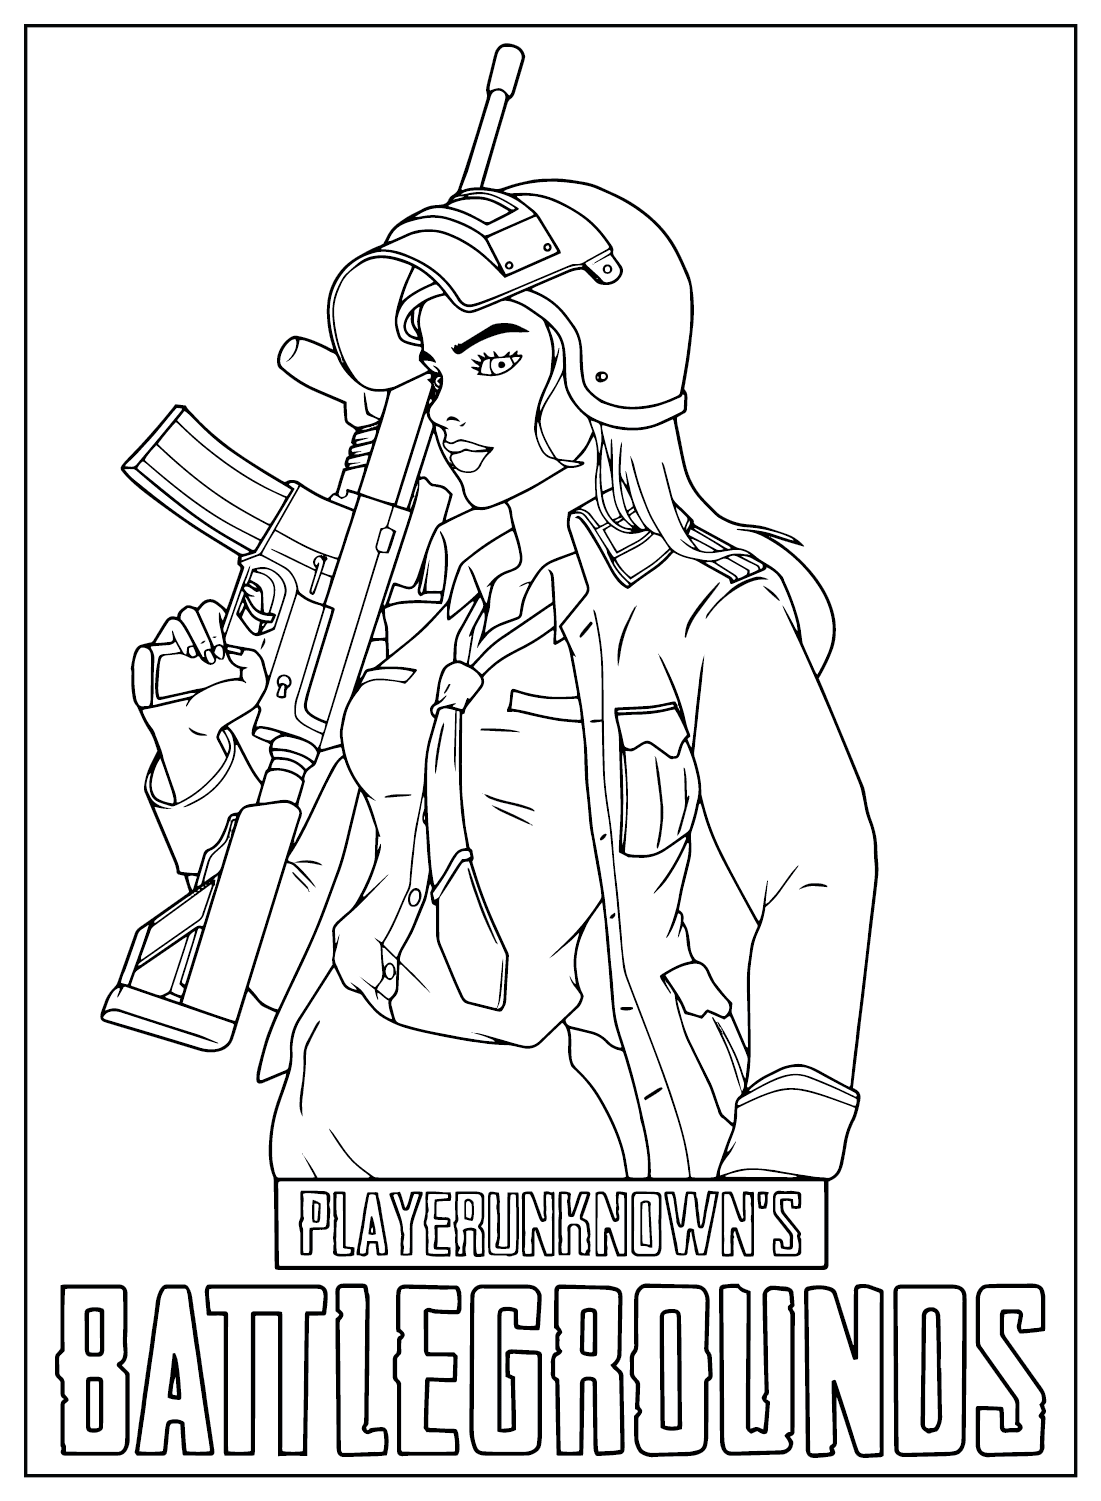 Pubg Battle Royale Coloring Page Free from PUBG